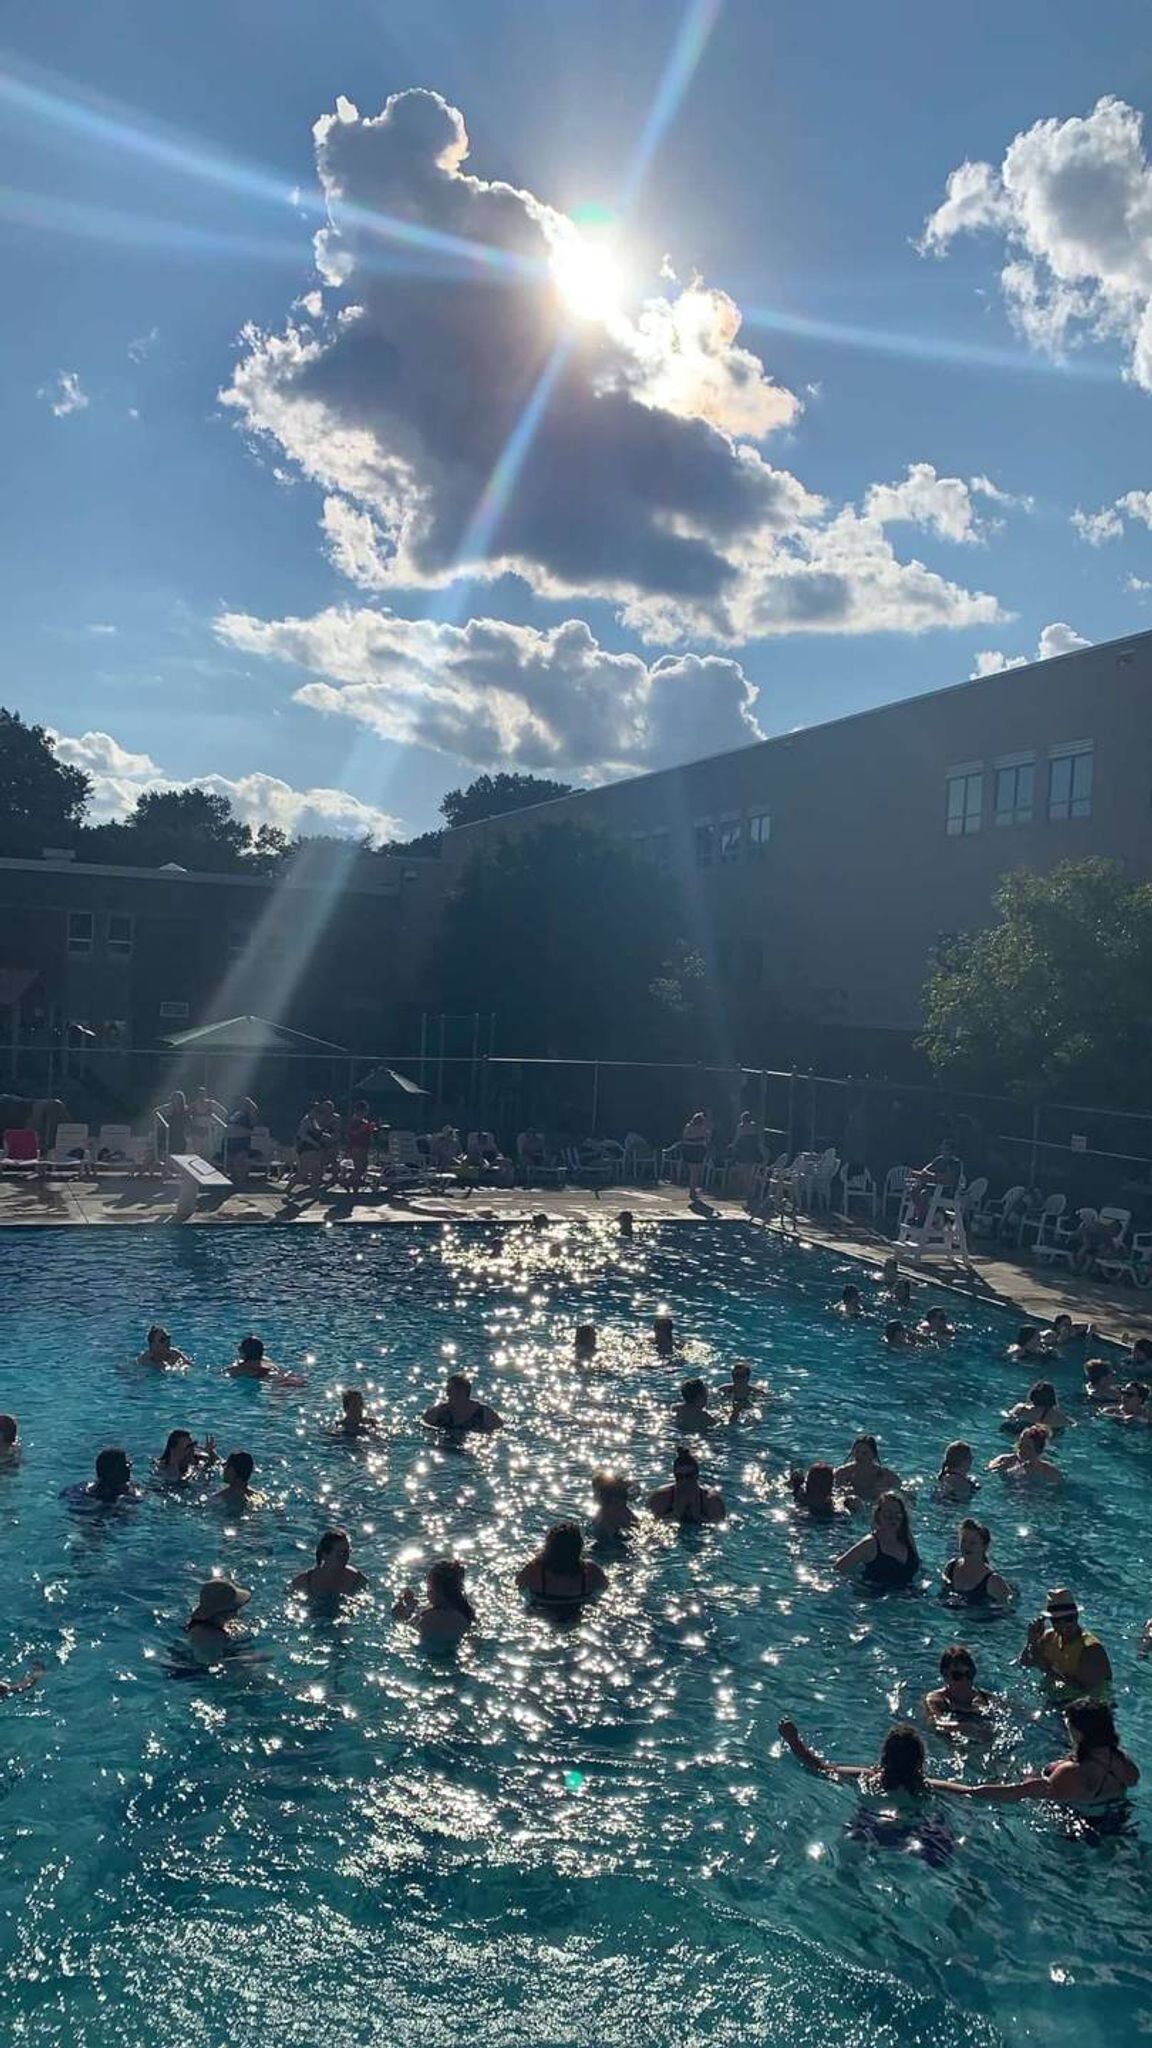 Fat Splash hosted two events with more than 300 people in summer 2019.